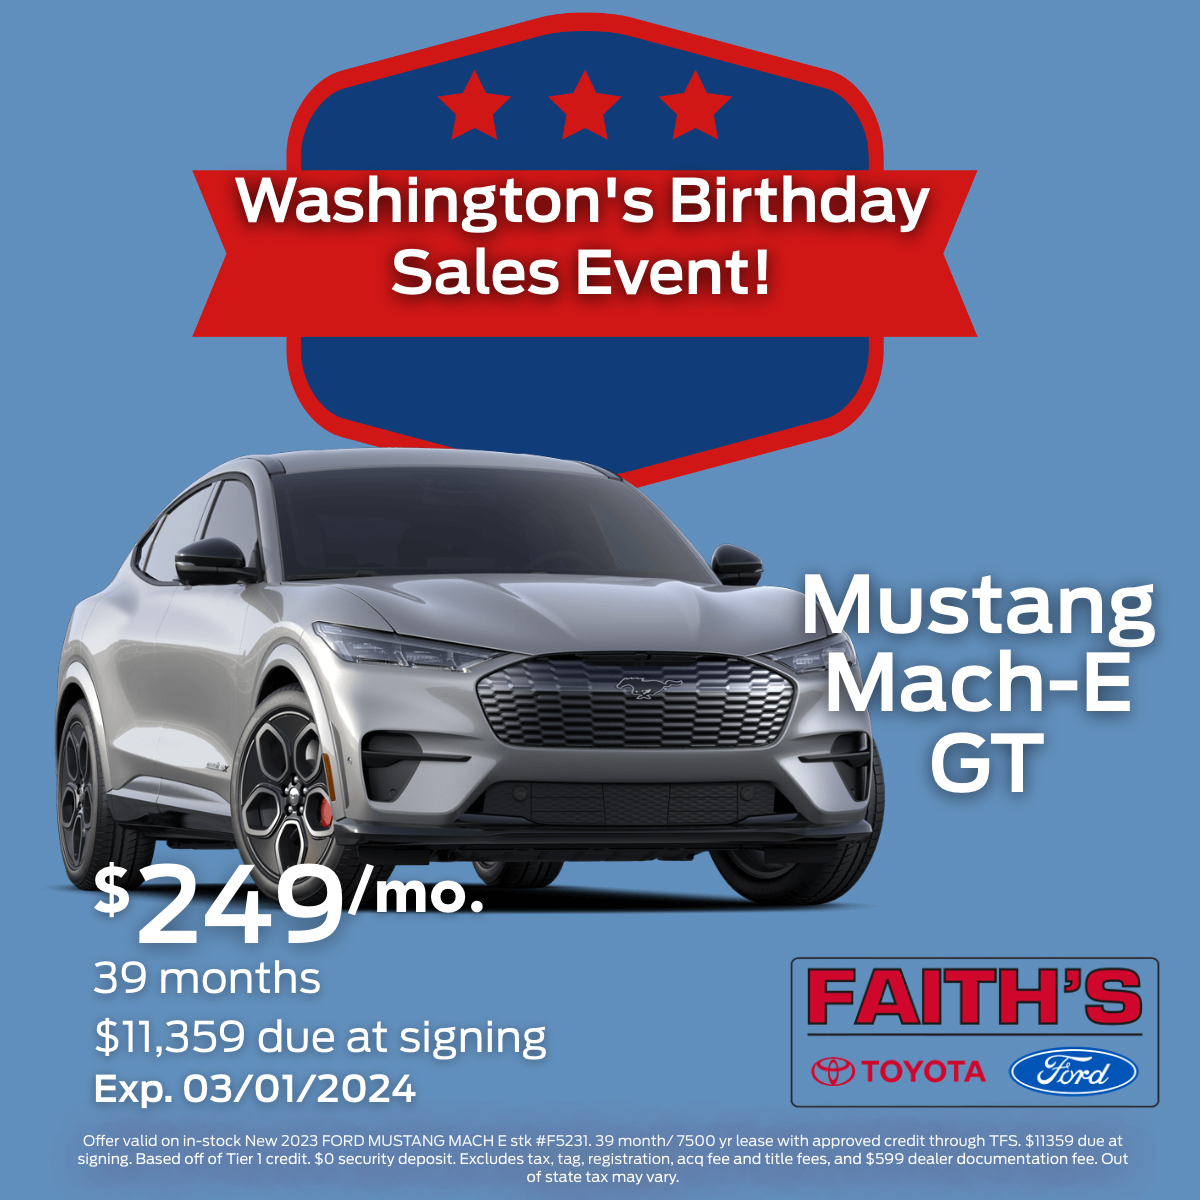 2023 Ford Mustang Mach-E GT Lease Offer | Faiths Auto Group